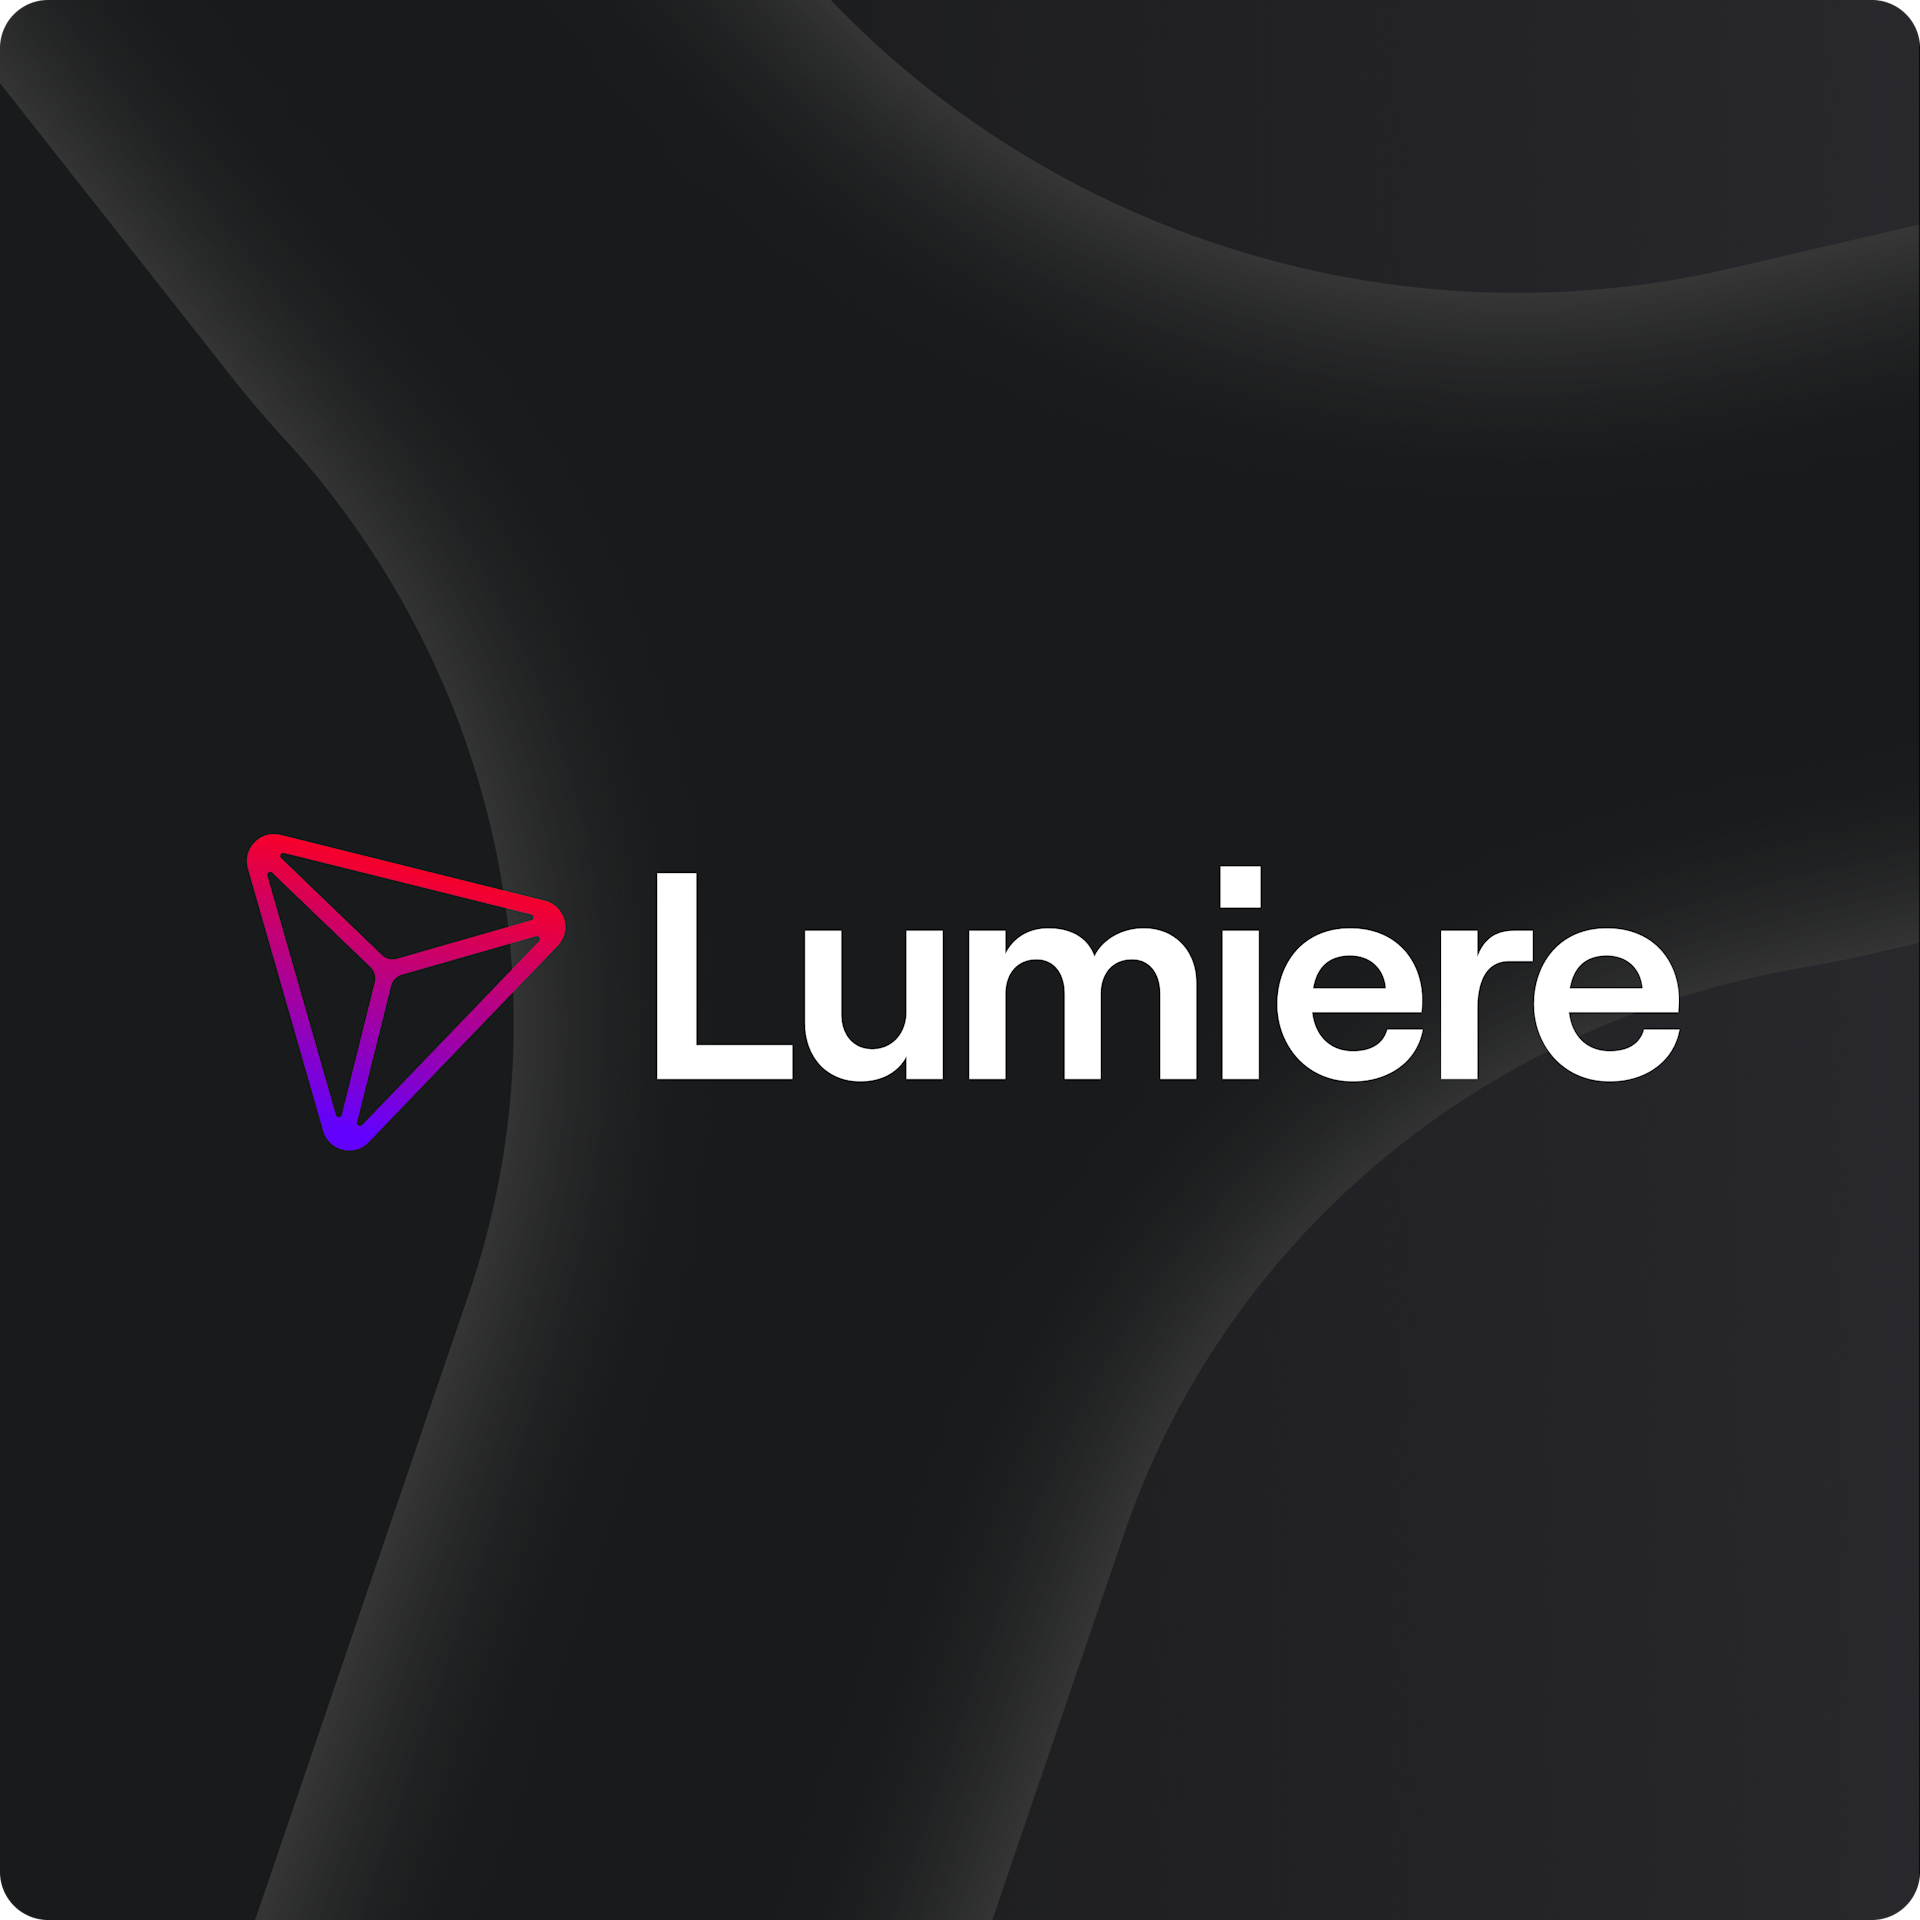 Designs we did for Lumiere